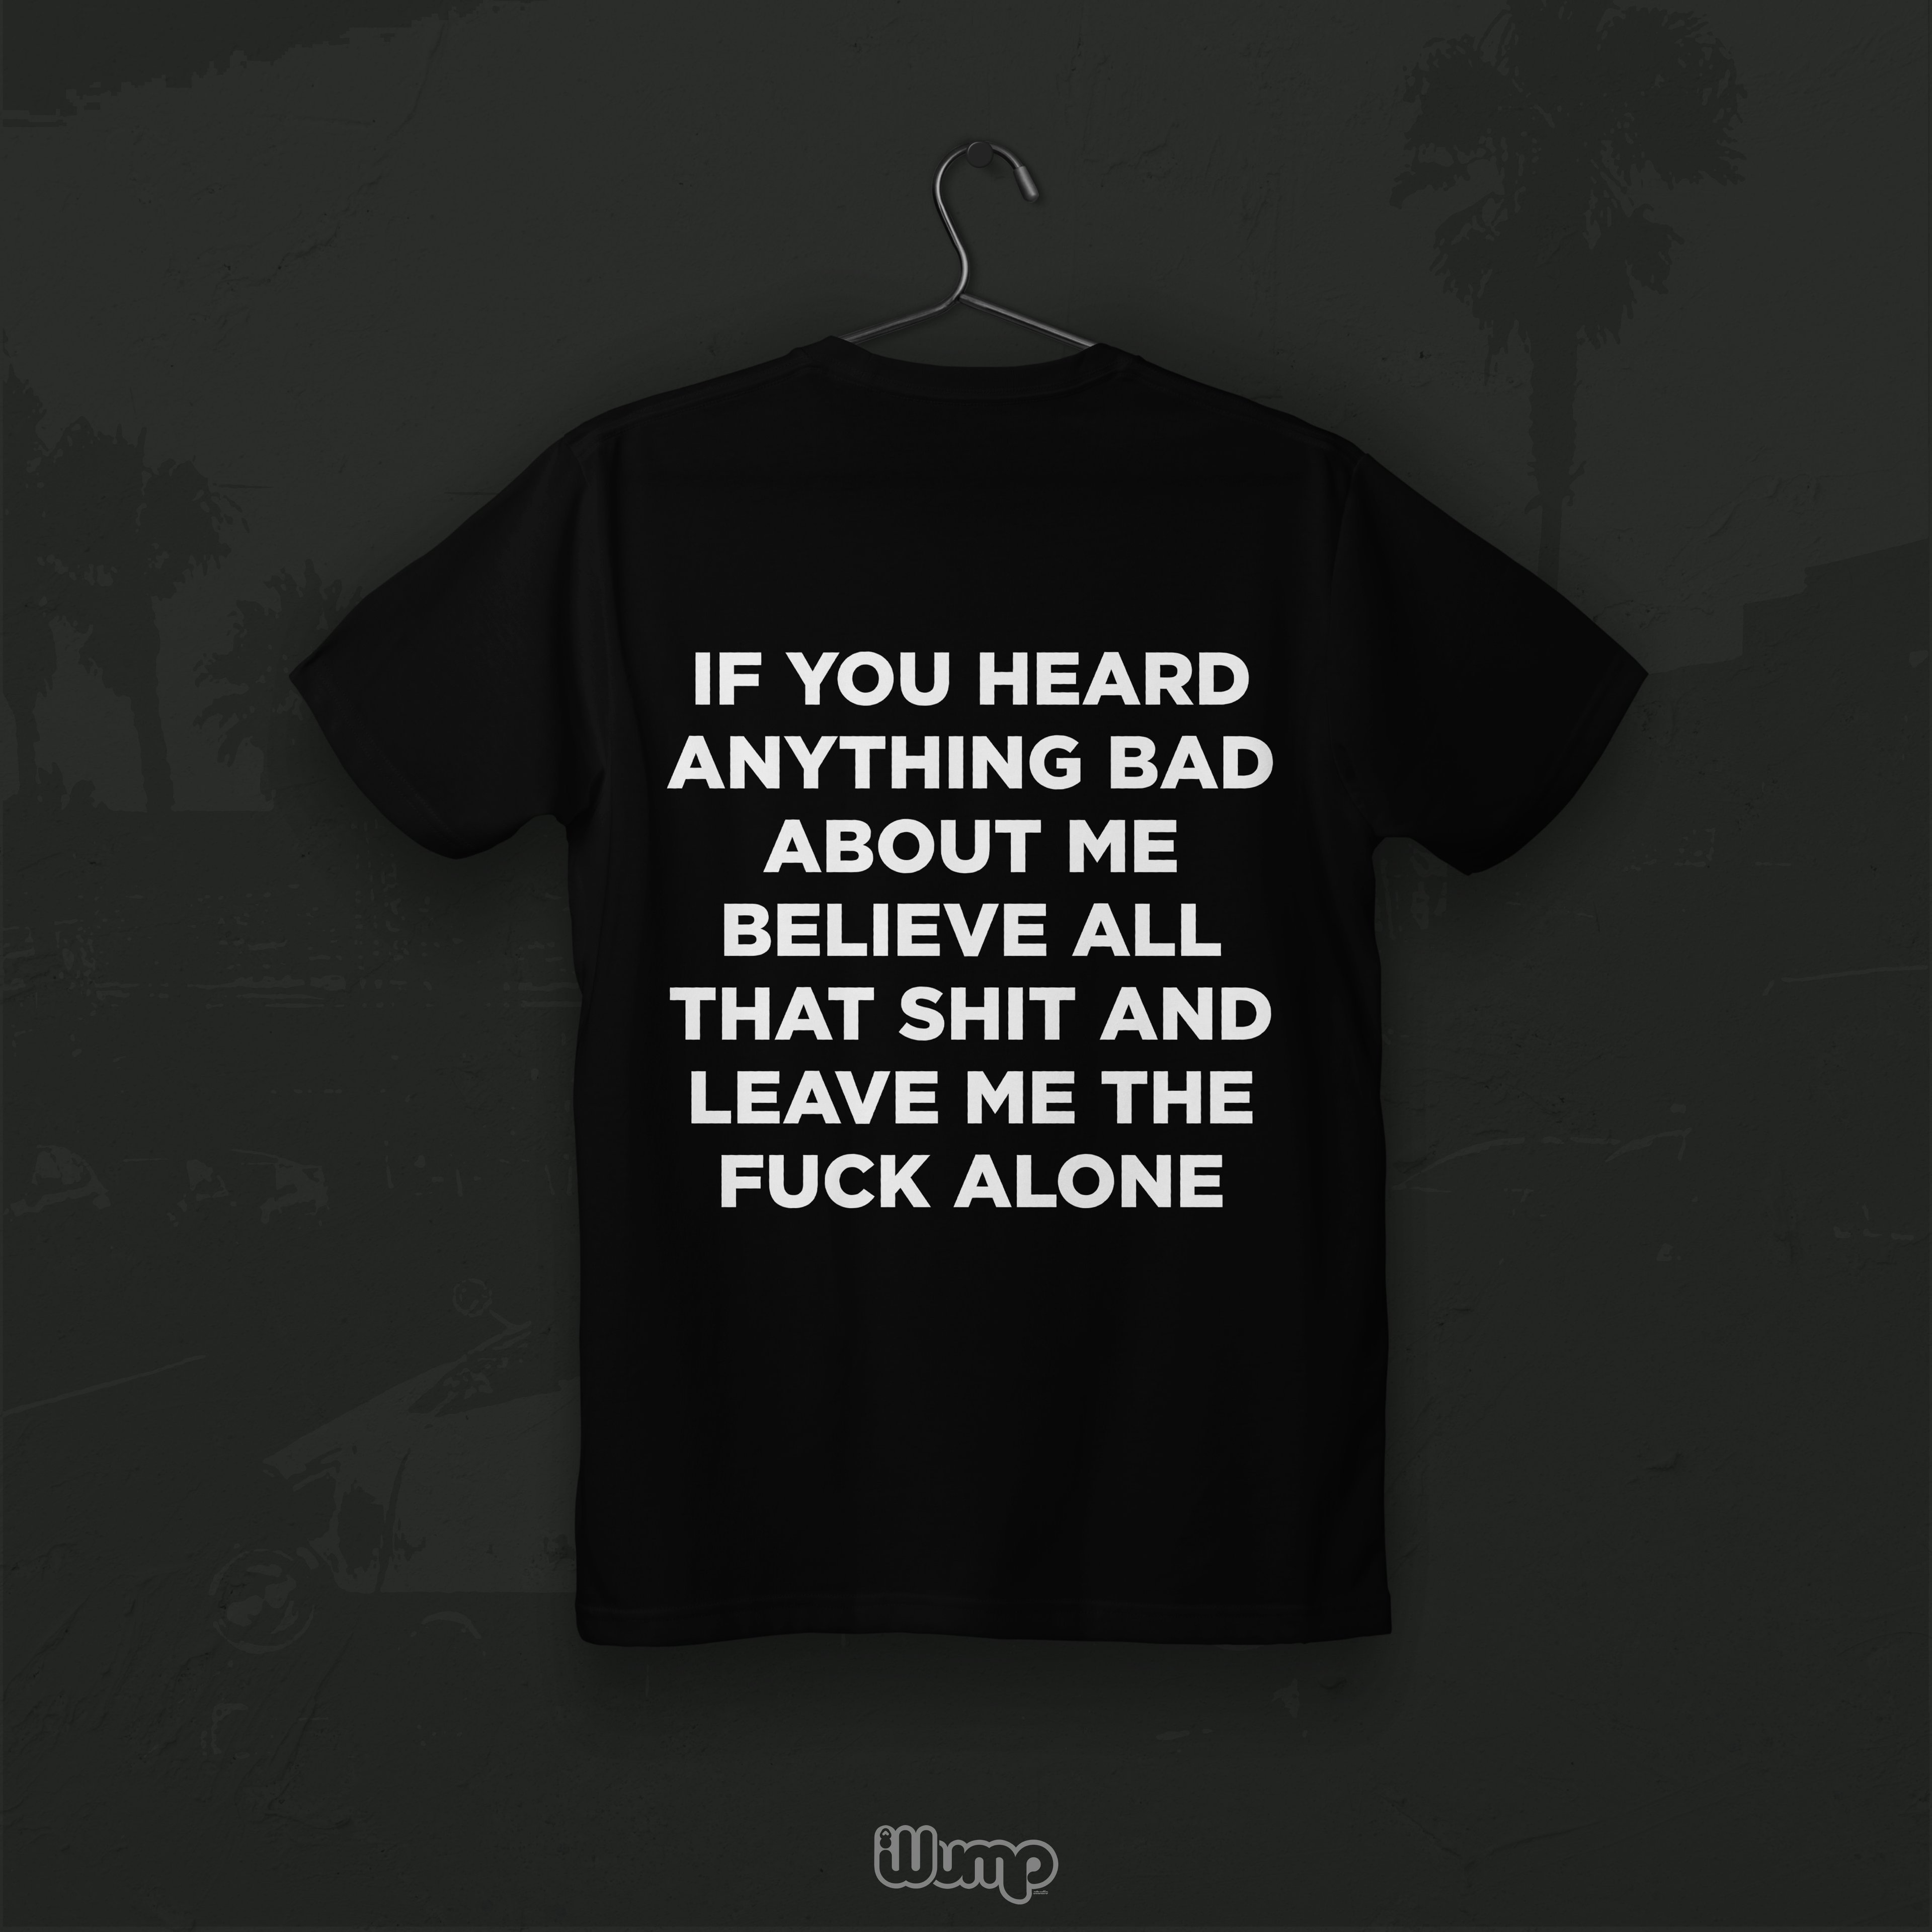 IF YOU HEARD ANYTHING BAD ABOUT ME LEAVE ME ALONE T-SHIRT